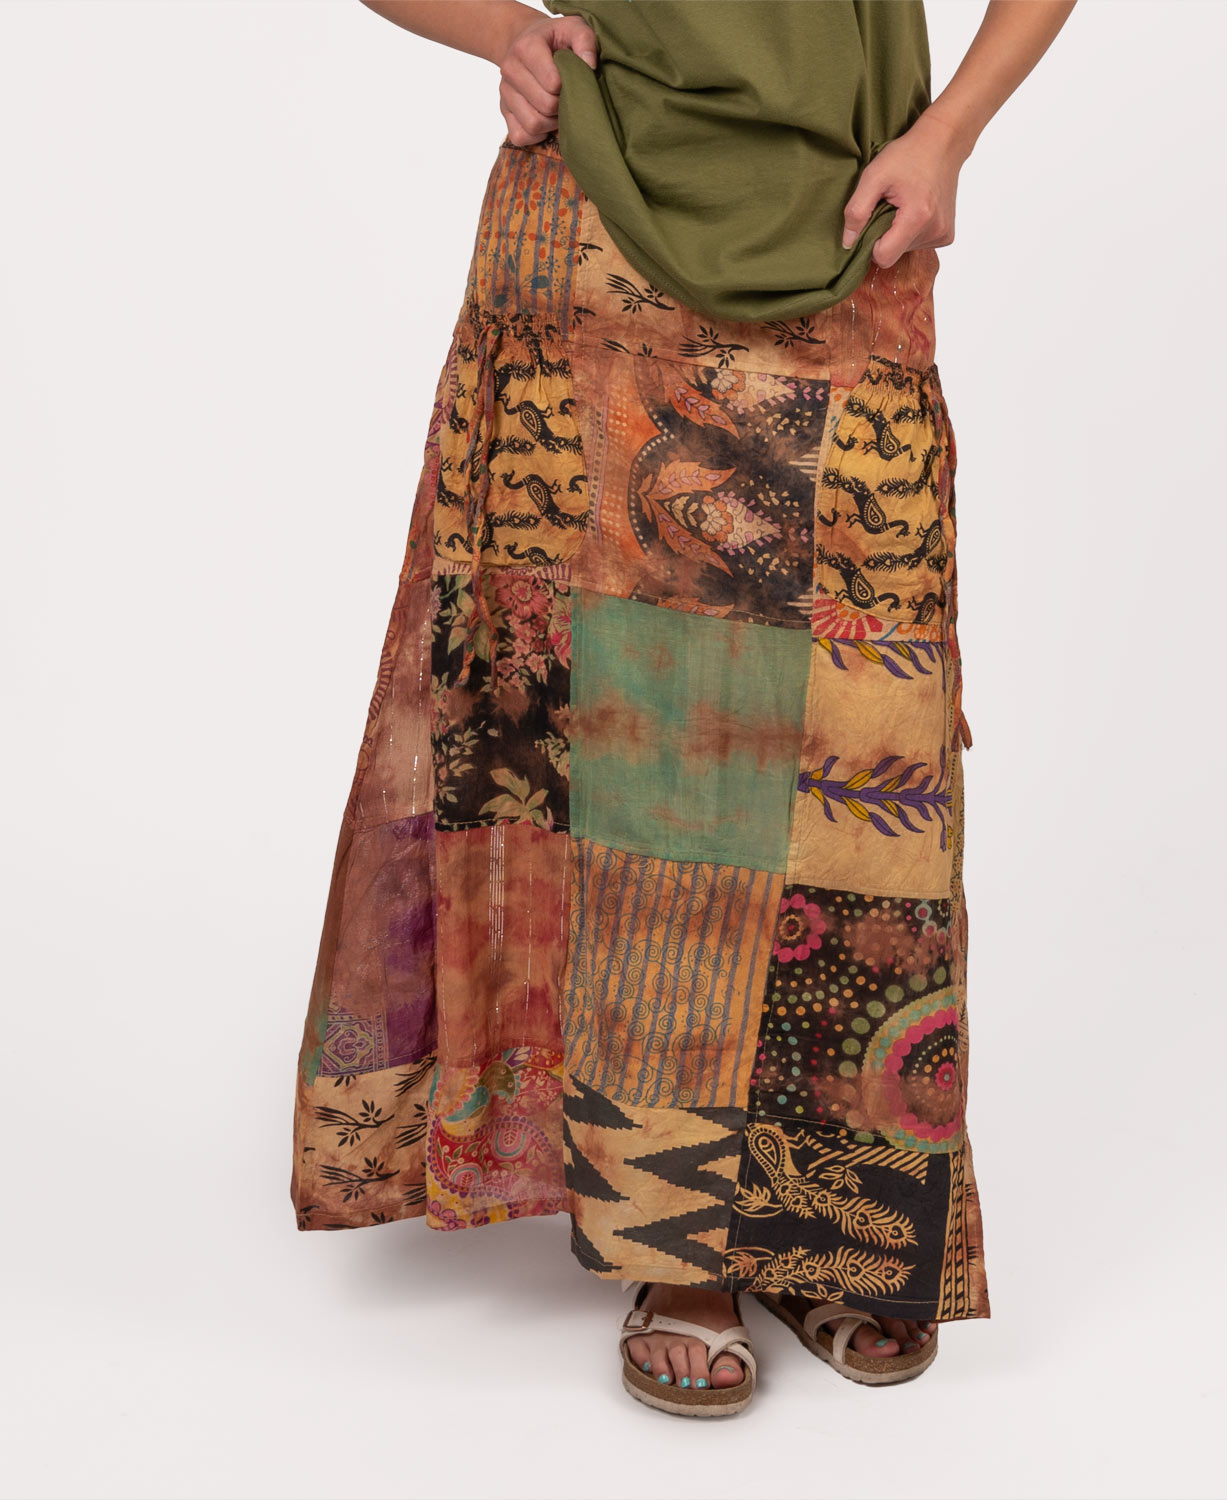 Tan Patchwork Hippie Maxi Skirt with Cargo Pockets